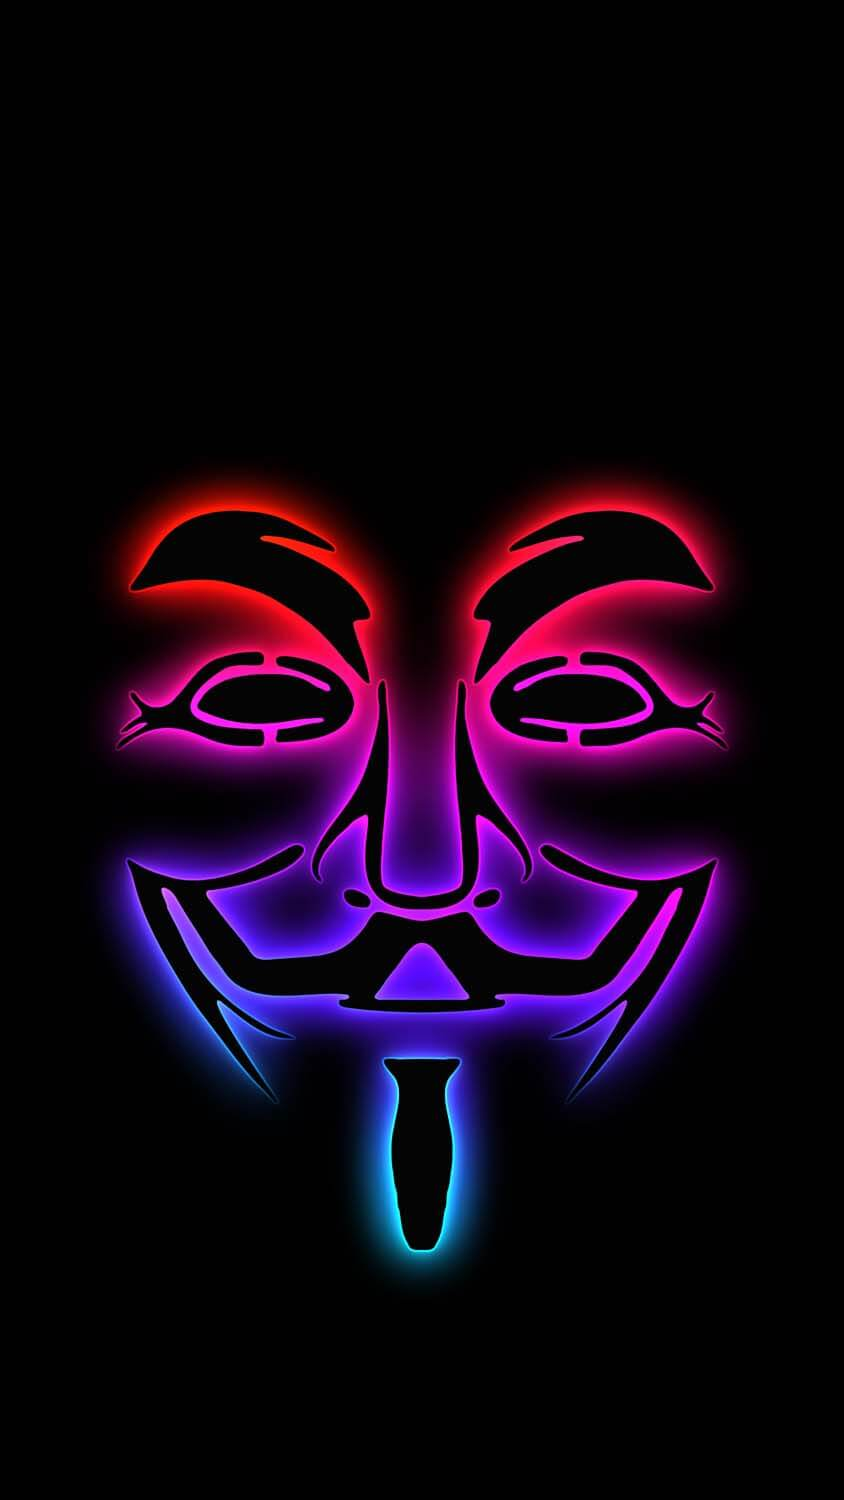 The Anonymous IPhone Wallpaper HD  IPhone Wallpapers